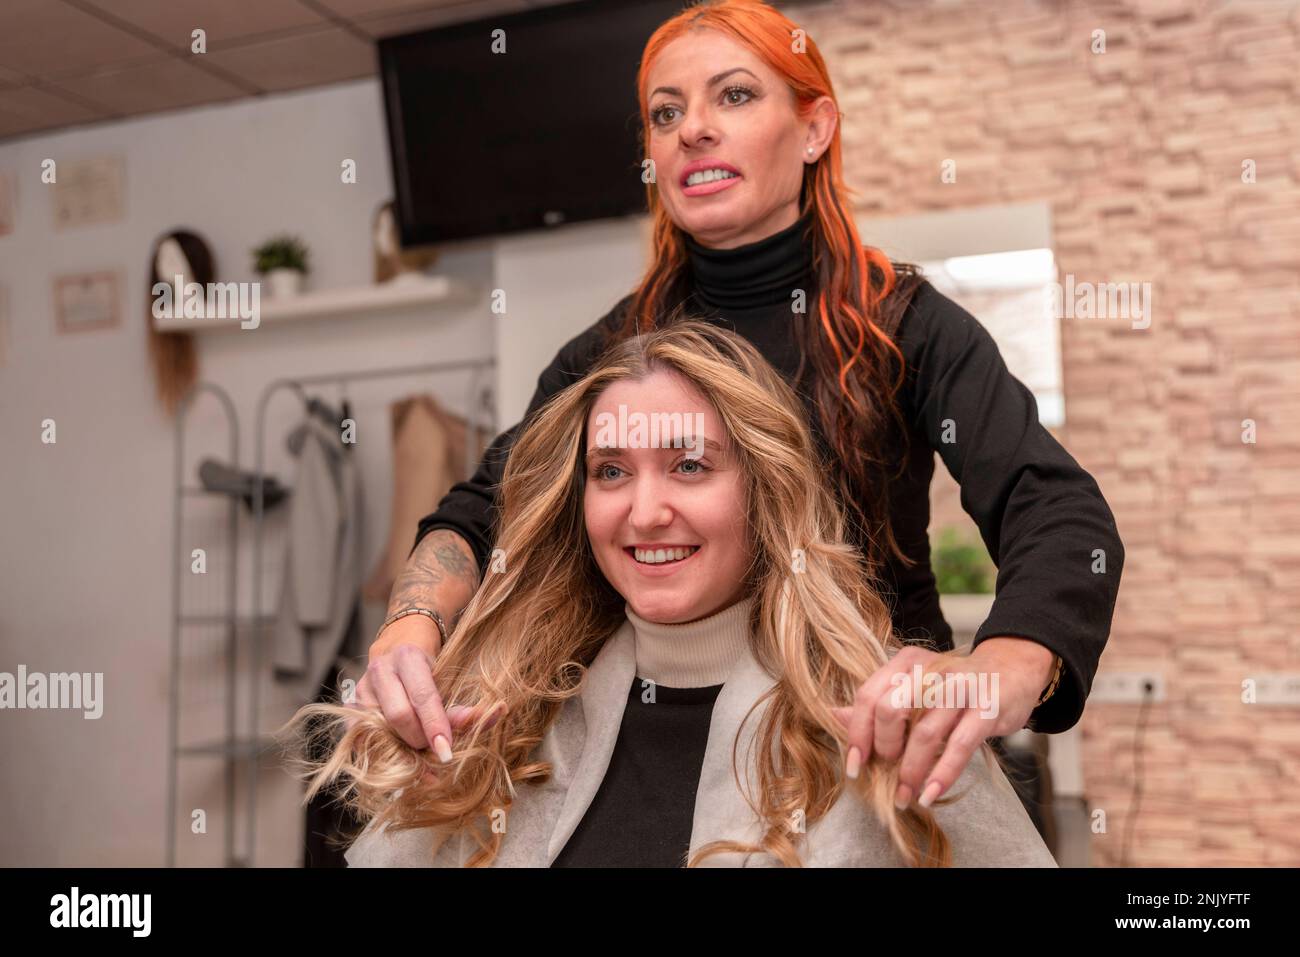 Cheerful female hairdresser smiling and checking hairstyle of happy young blond haired client in beauty salon Stock Photo